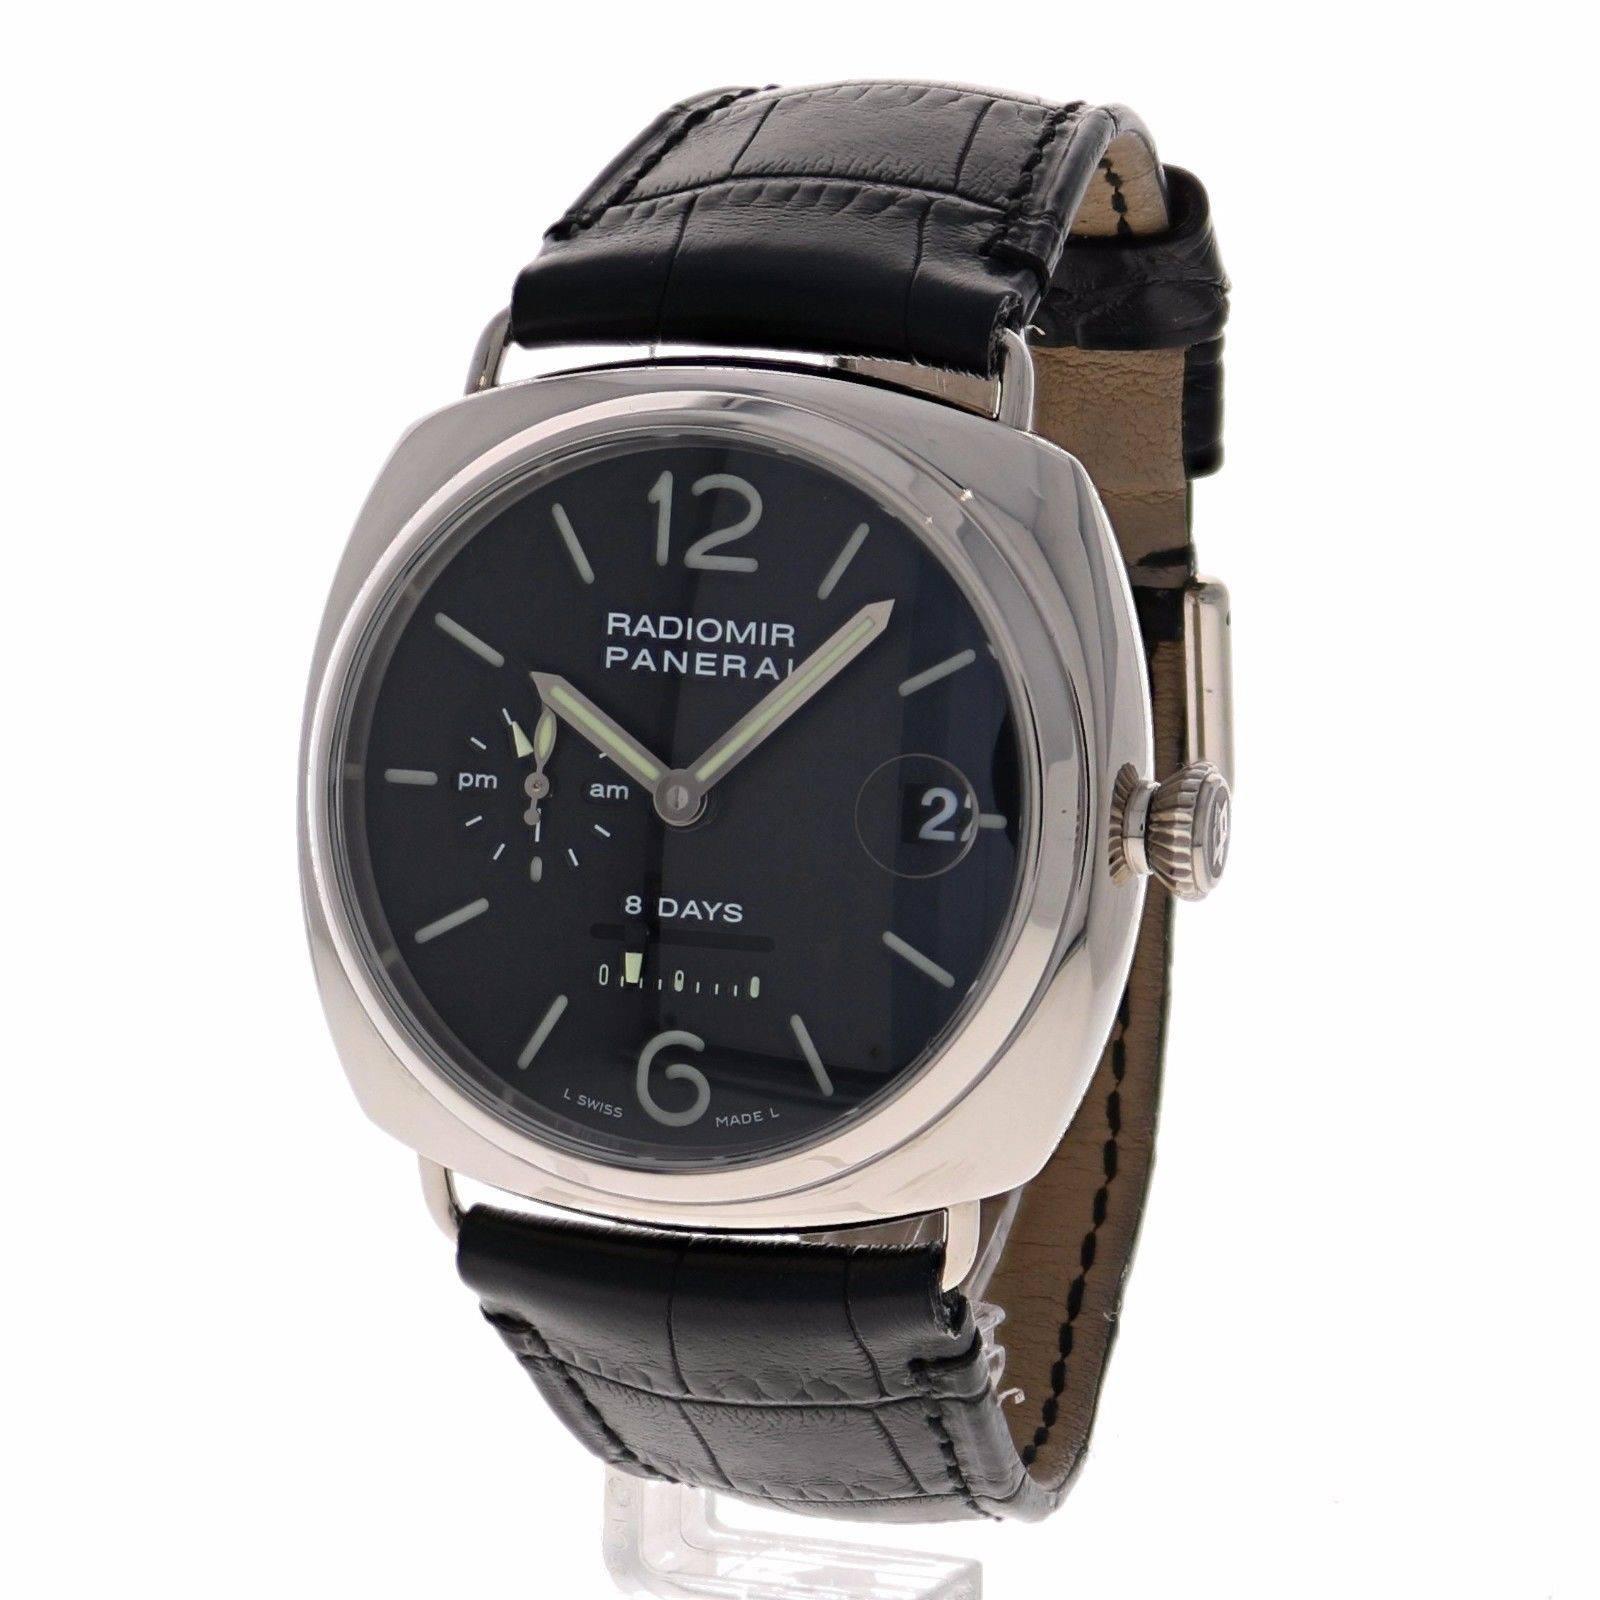 Brand Name 
Panerai 
Style Number 
PAM 200 
Also Called 
PAM00200 
Series 
Radiomir 8 Days GMT  
Gender 
Men's 
Case Material 
18k White Gold 
Dial Color 
Black 
Movement 
Mechanical Hand Wound 
Engine 
Calibre P. 2002 
Functions 
hours, minutes,